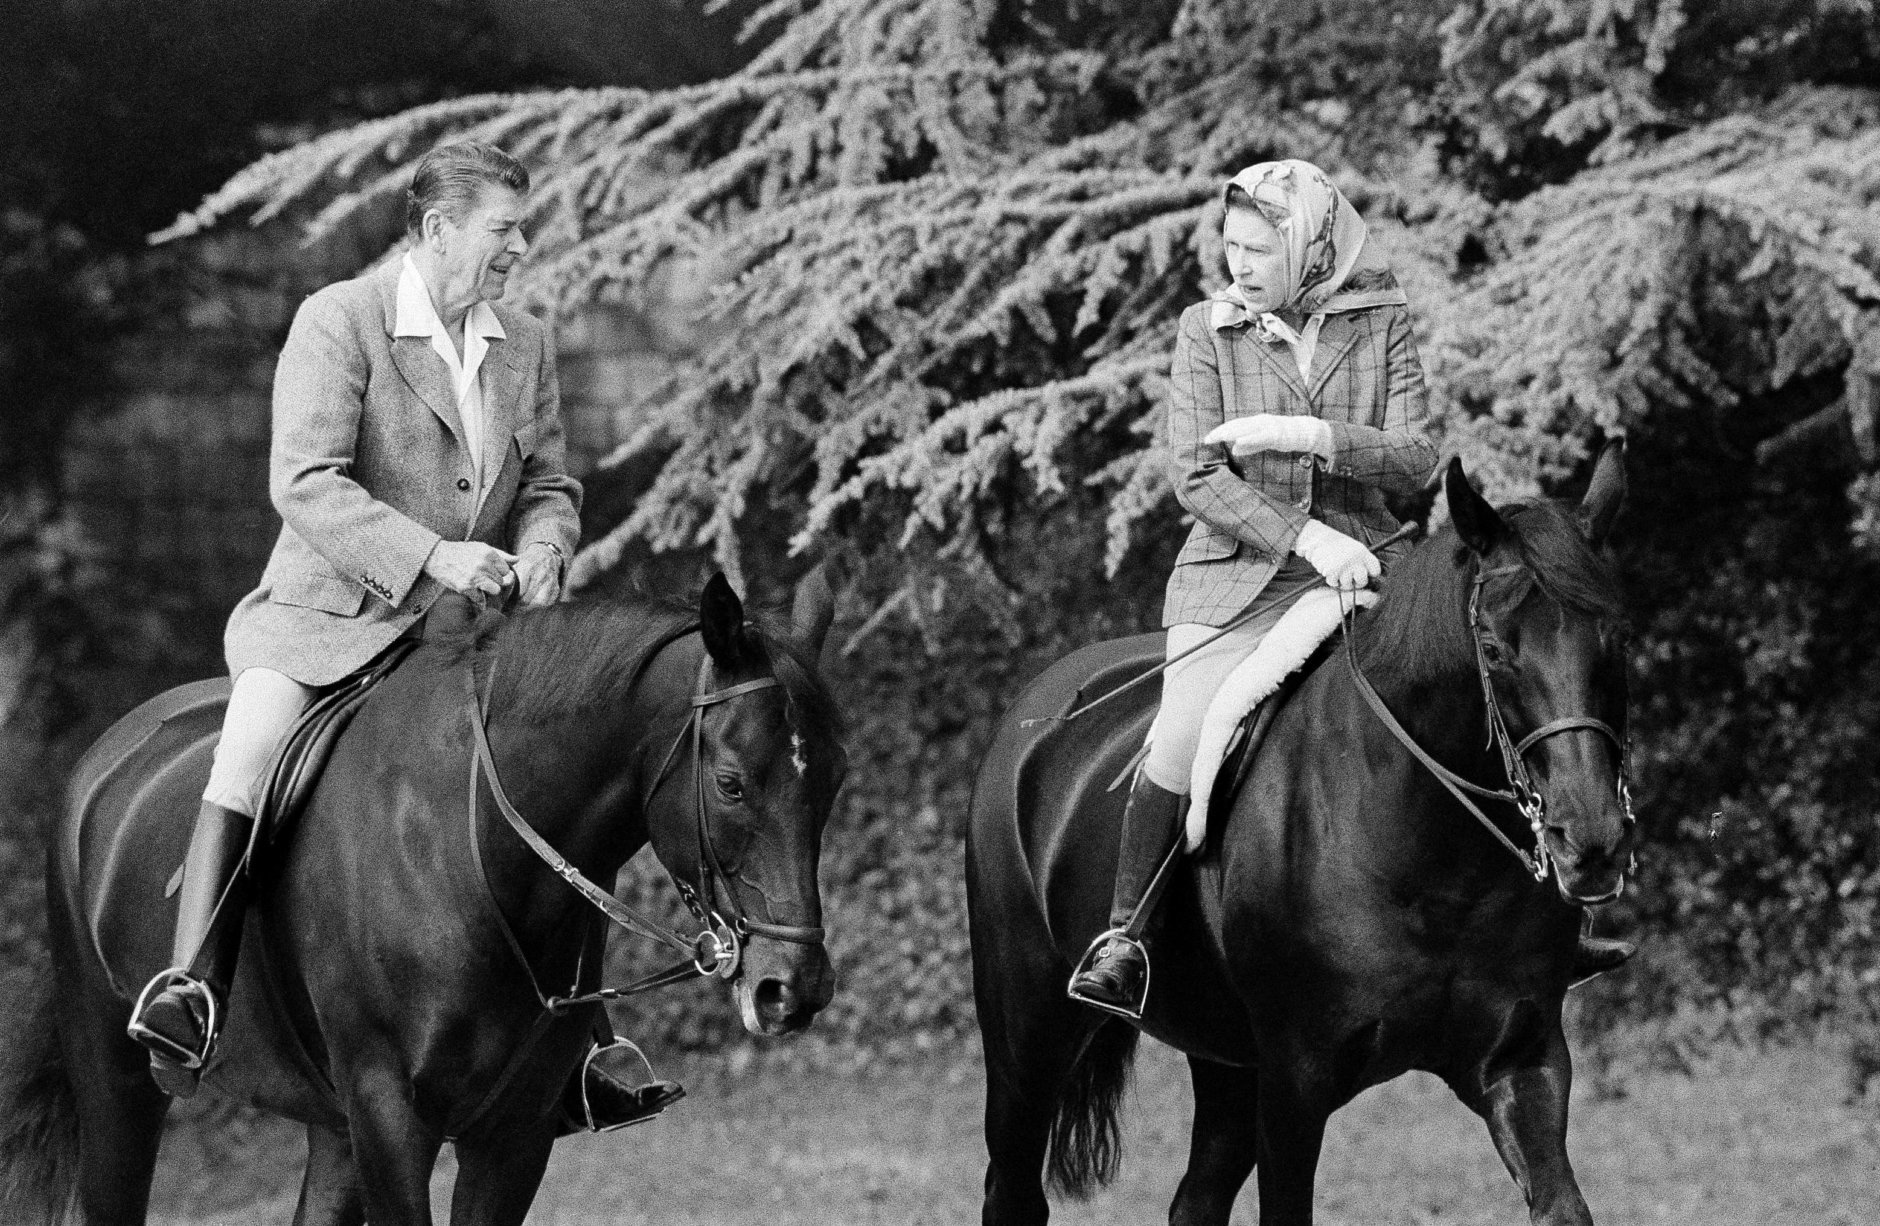 Queen Elizabeth II gestures as she chats with U.S. President Ronald Reagan during a ride through the grounds of Windsor Castle, June 8, 1982. President and Mrs. Reagan are currently on a three-day visit to Britain. (AP Photo/Bob Daugherty)